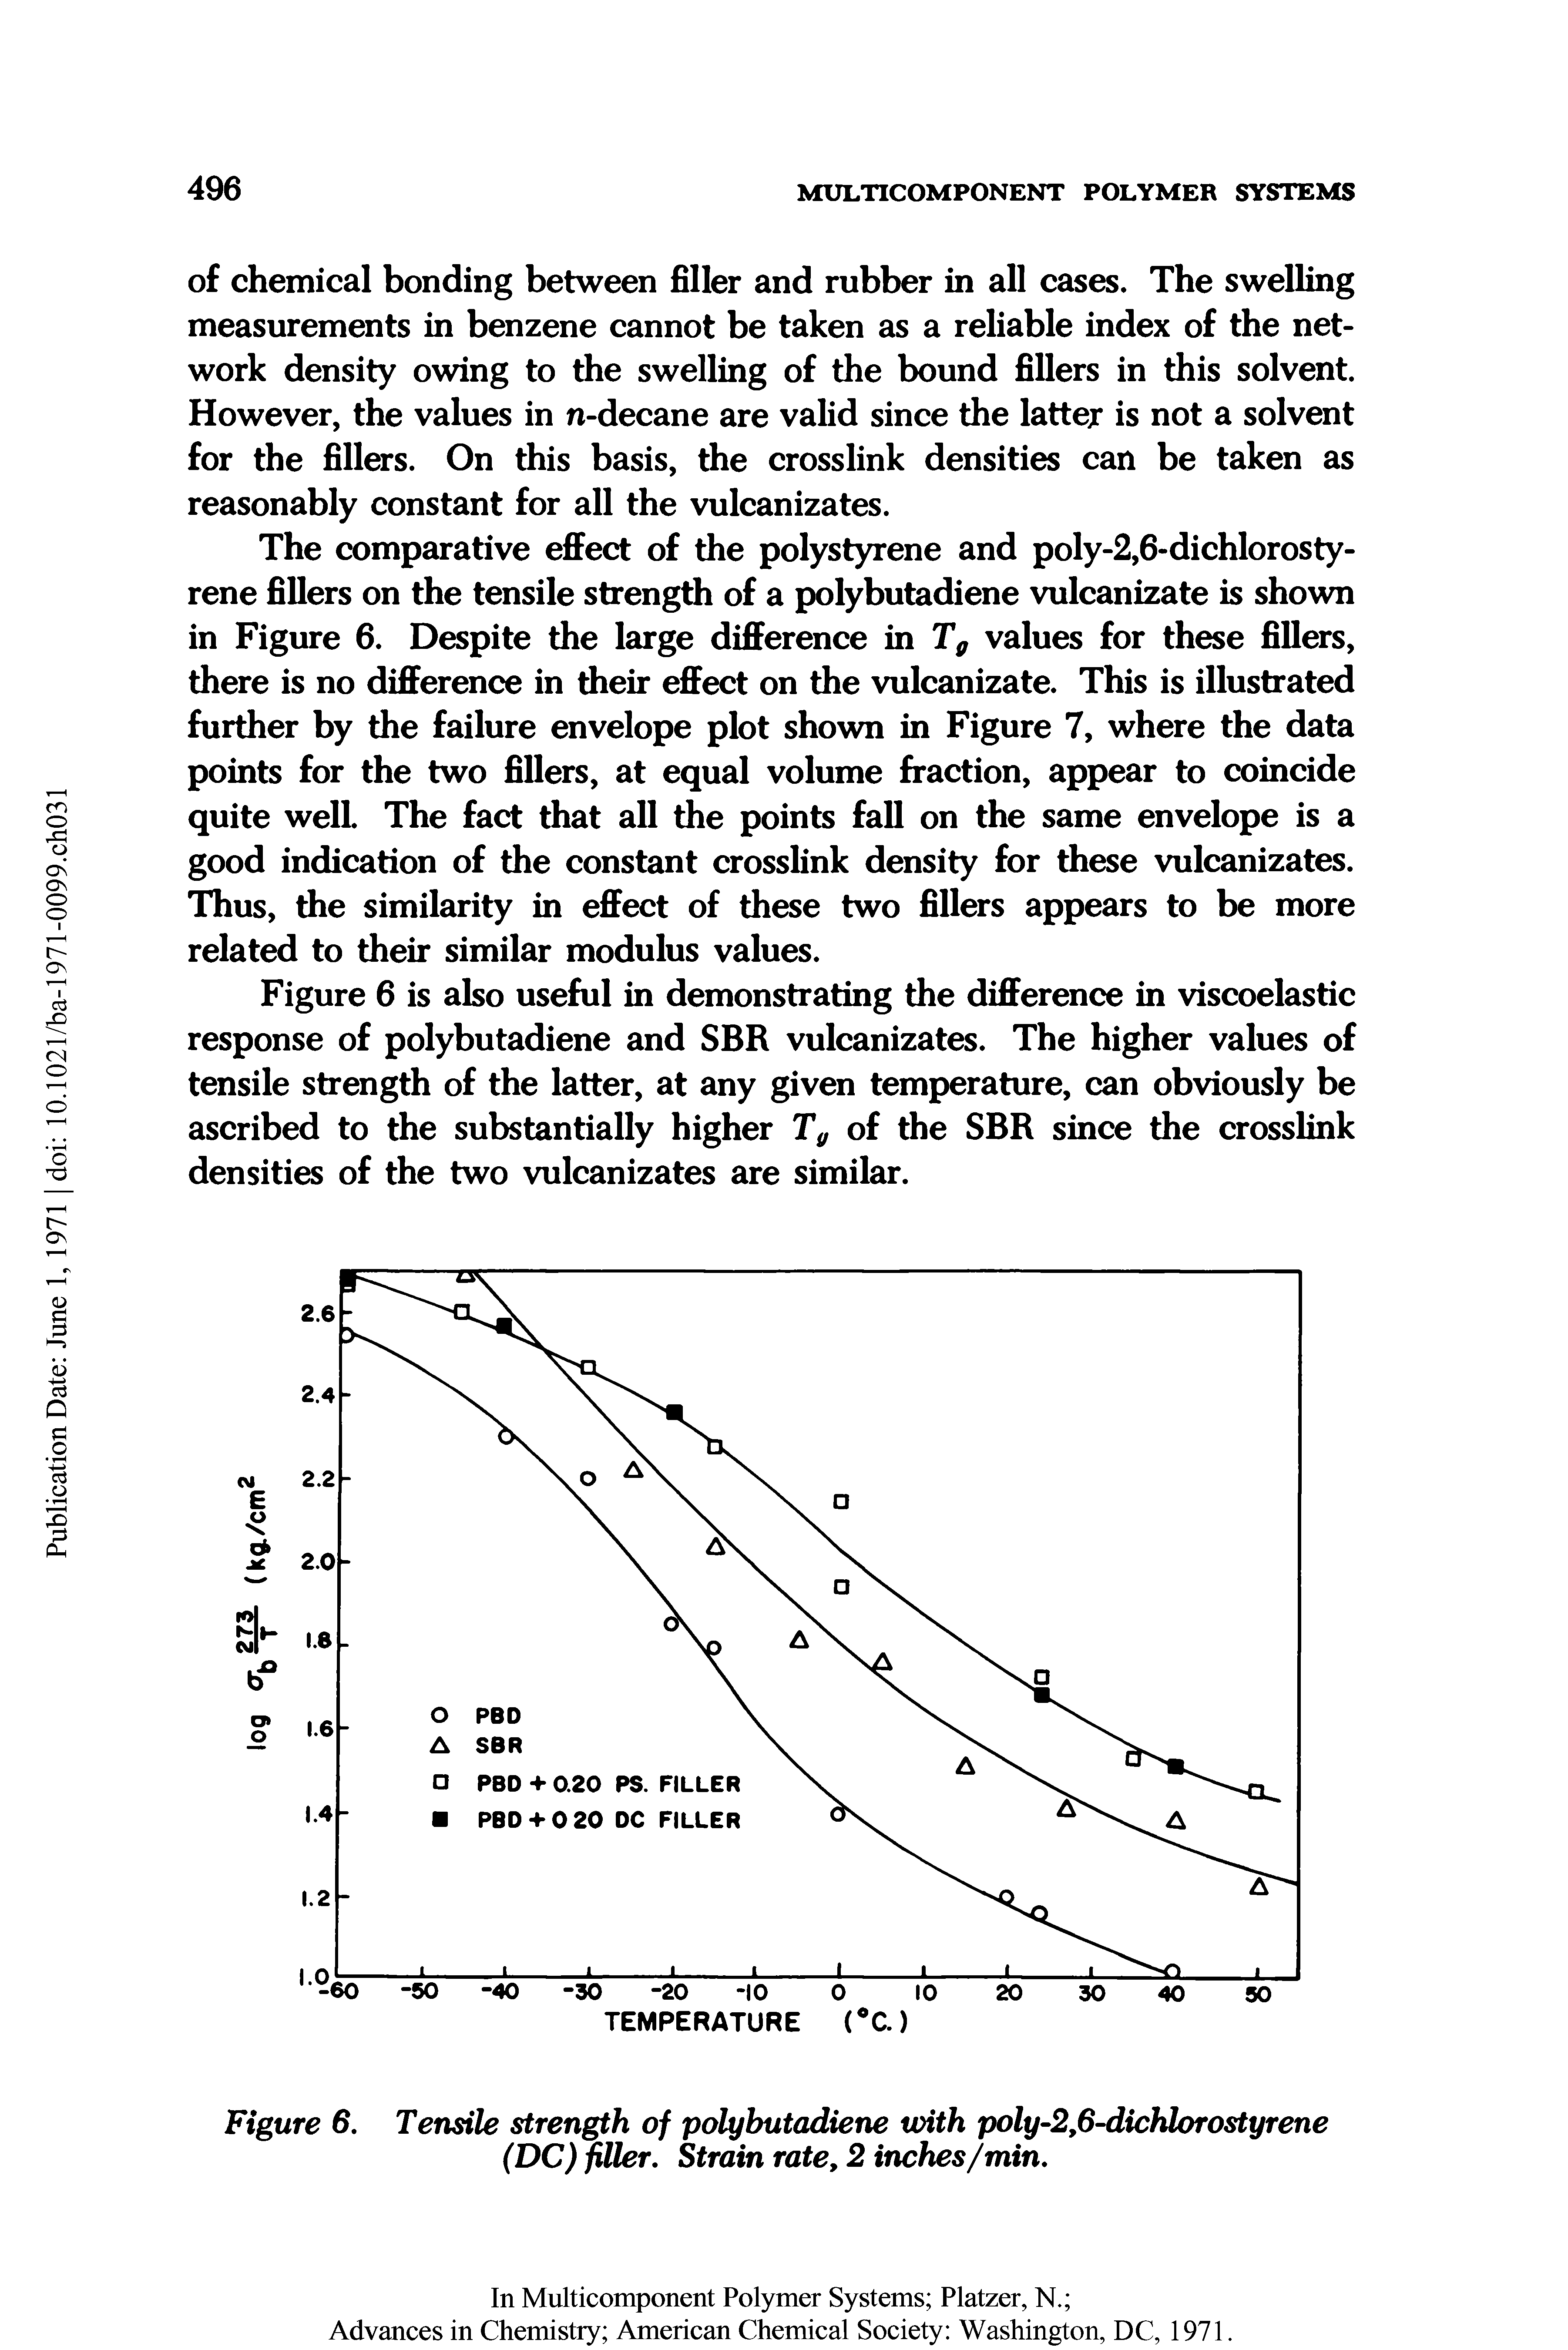 Figure 6. Tensile strength of polybutadiene with poly-2,6-dichlorostyrene (DC) filler. Strain rate, 2 inches/min.